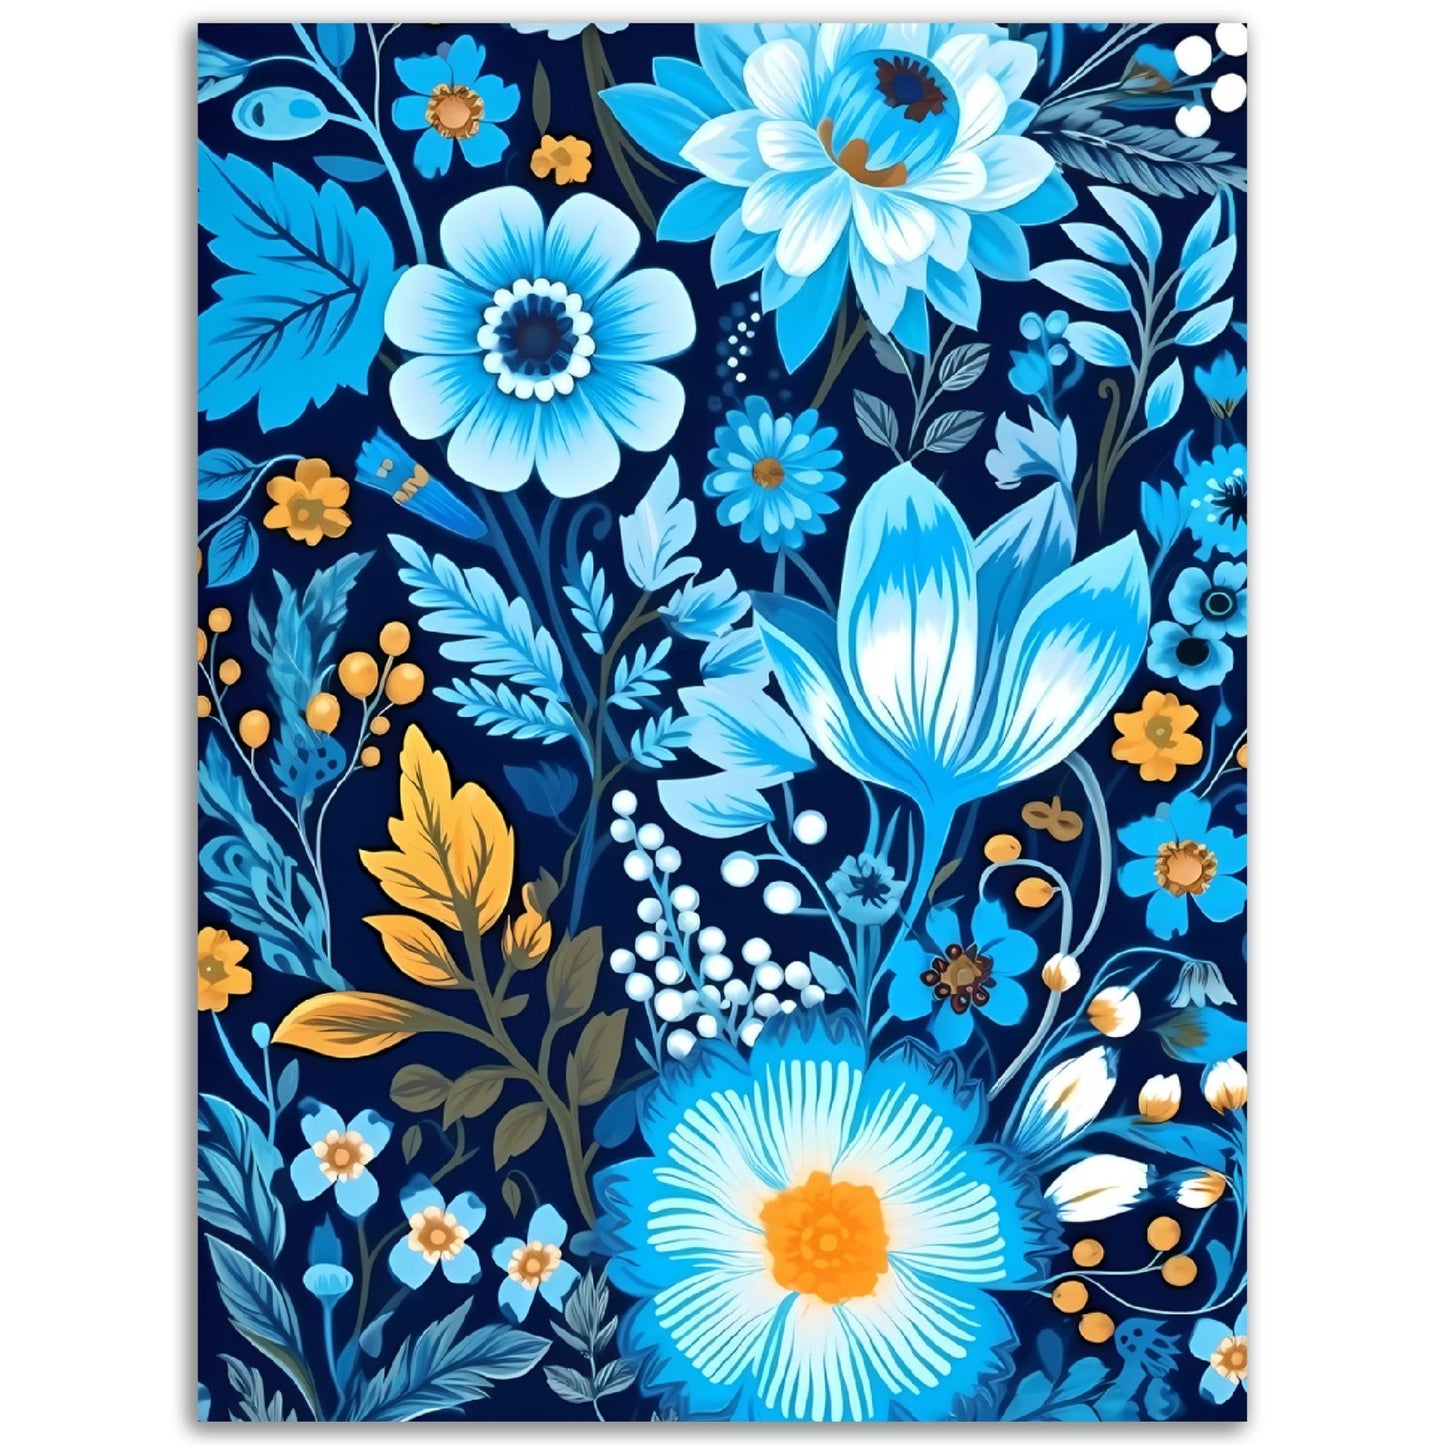 A blue and yellow Blue Floral Pattern on a dark blue background, transformed into stunning wall art.